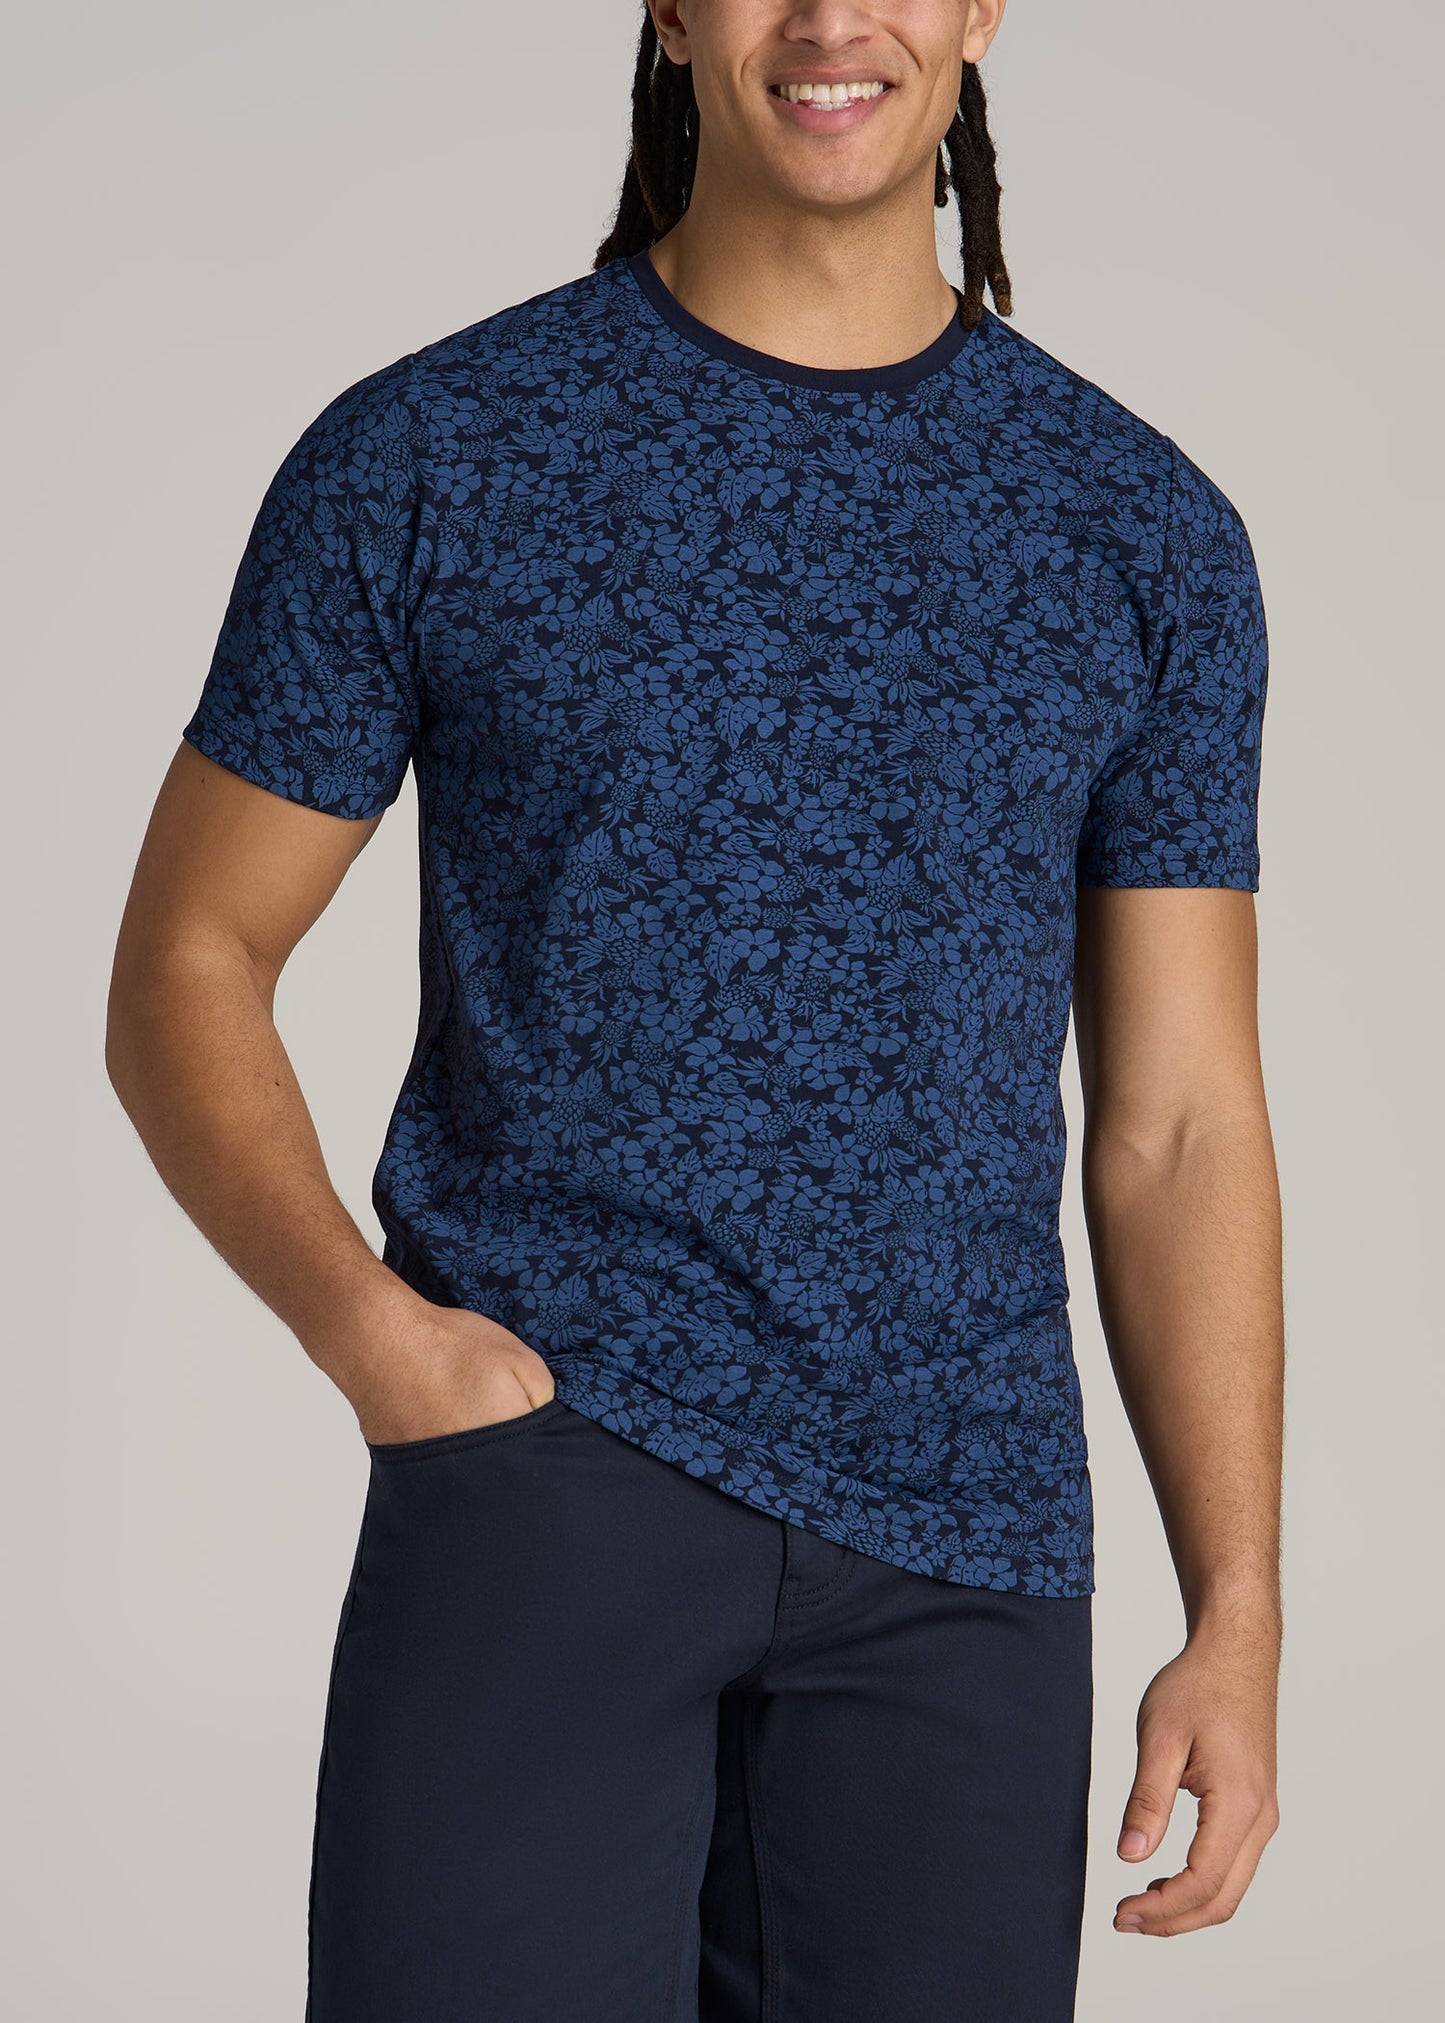 A tall man wearing American Tall's Stretch Pima Cotton Printed Tee for Tall Men in Blue Hibiscus.